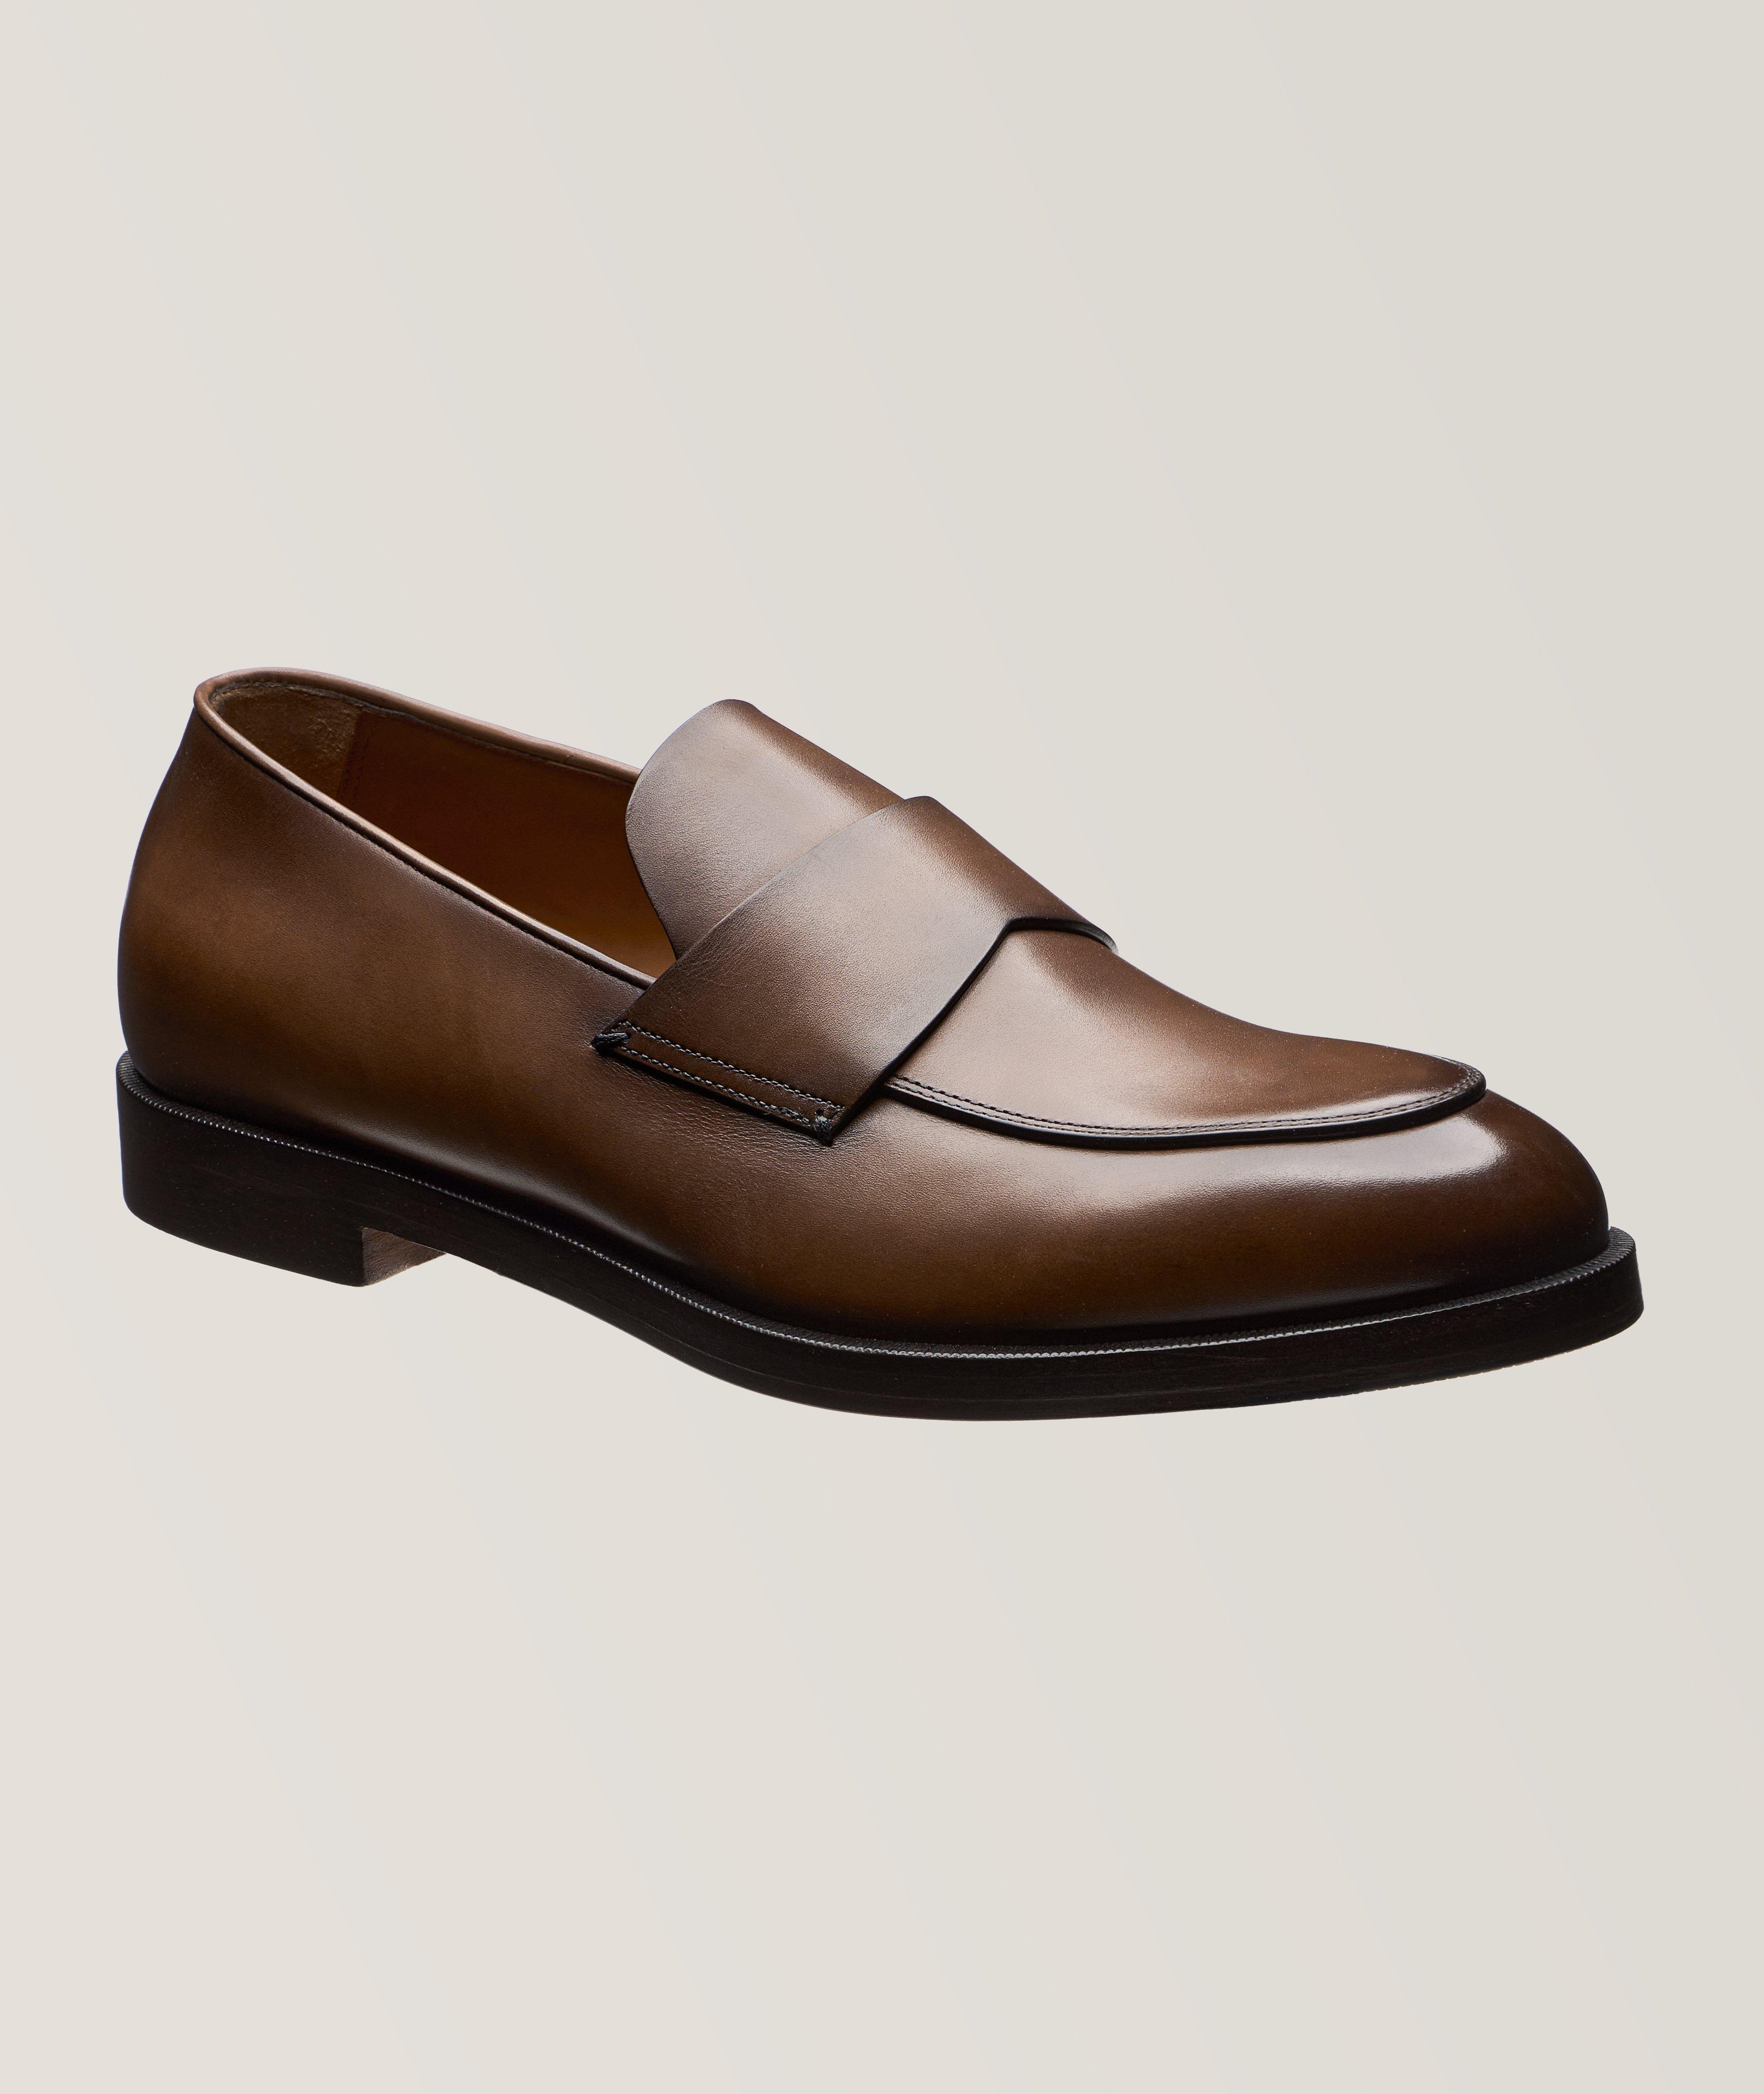 Torino Banded Leather Loafers image 0